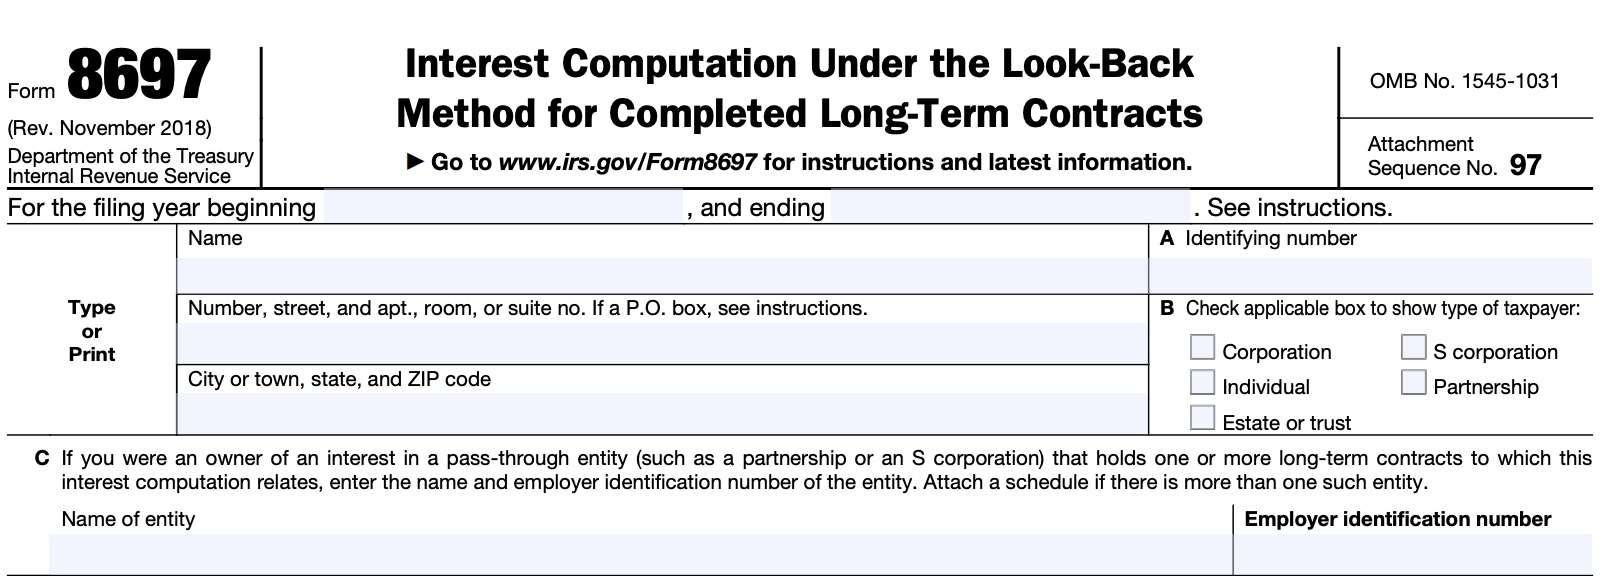 irs form 8697, interest computation under the look-back method for completed long-term contracts